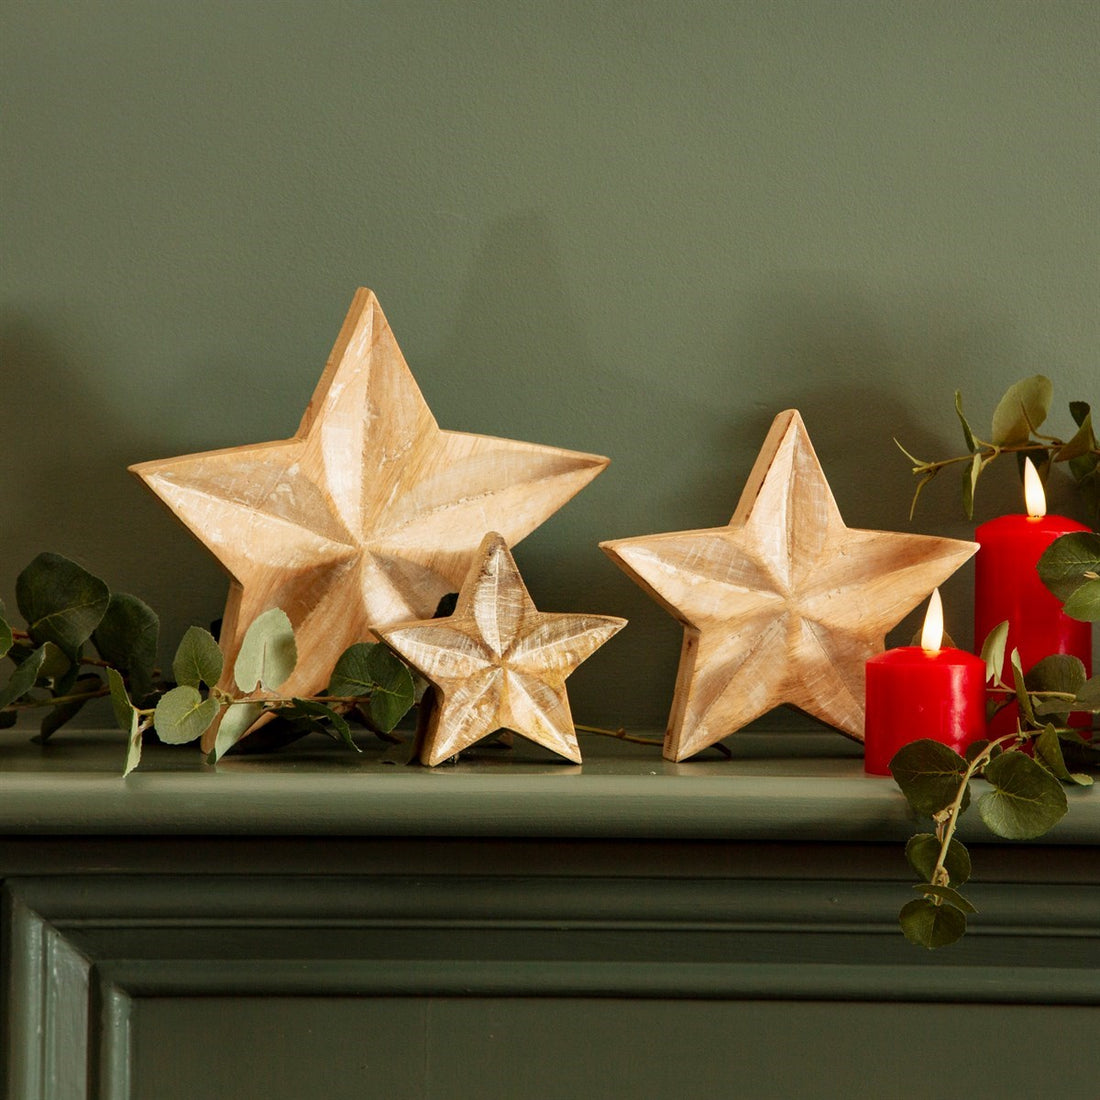 Three chunky wooden stars with etched line details